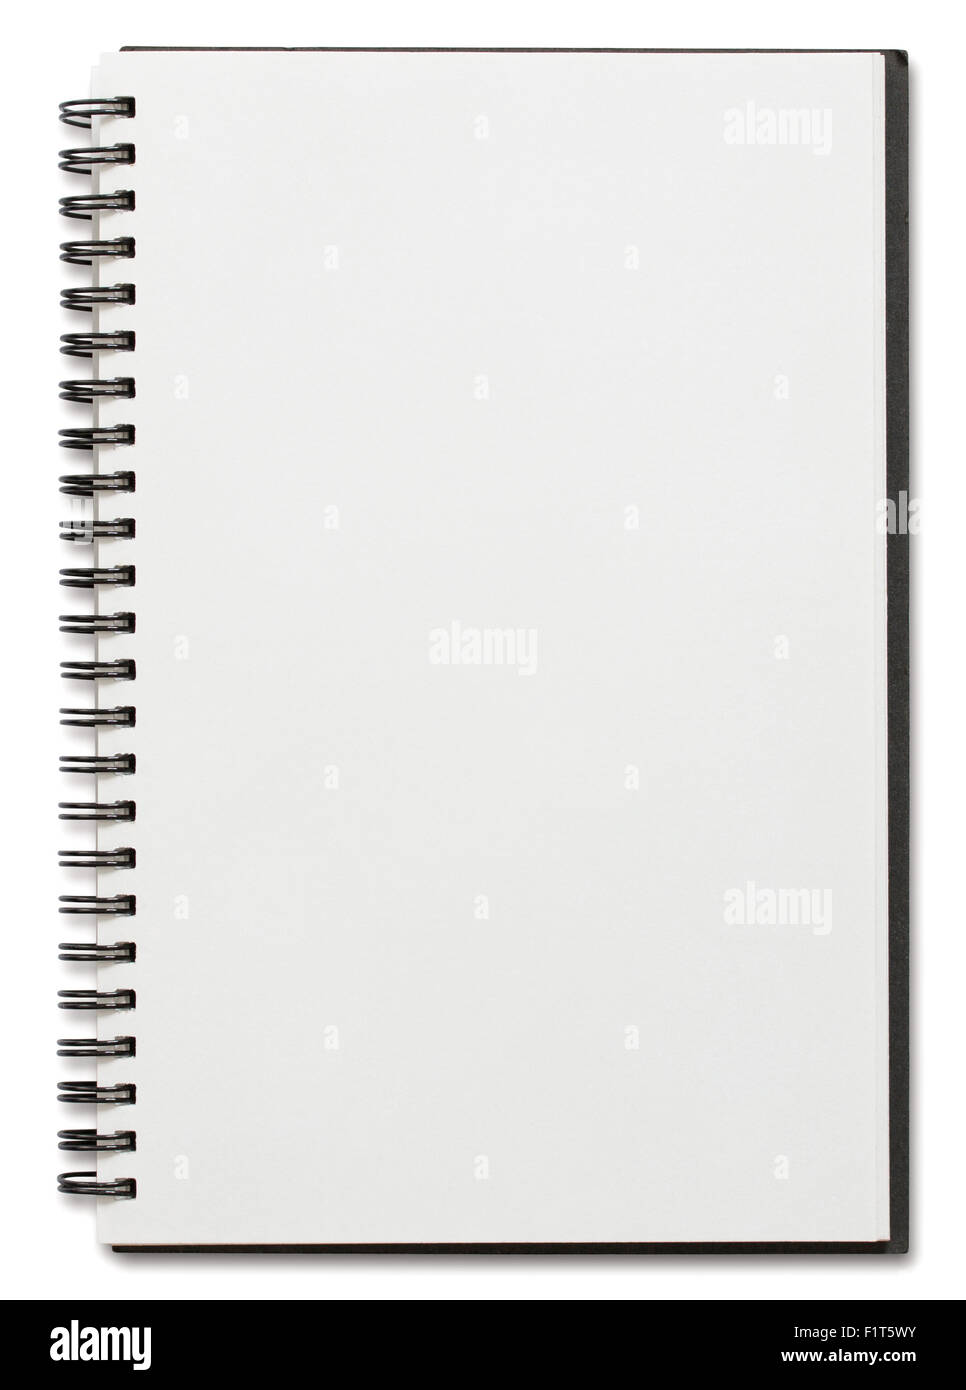 blank spiral notebook isolated on white background Stock Photo